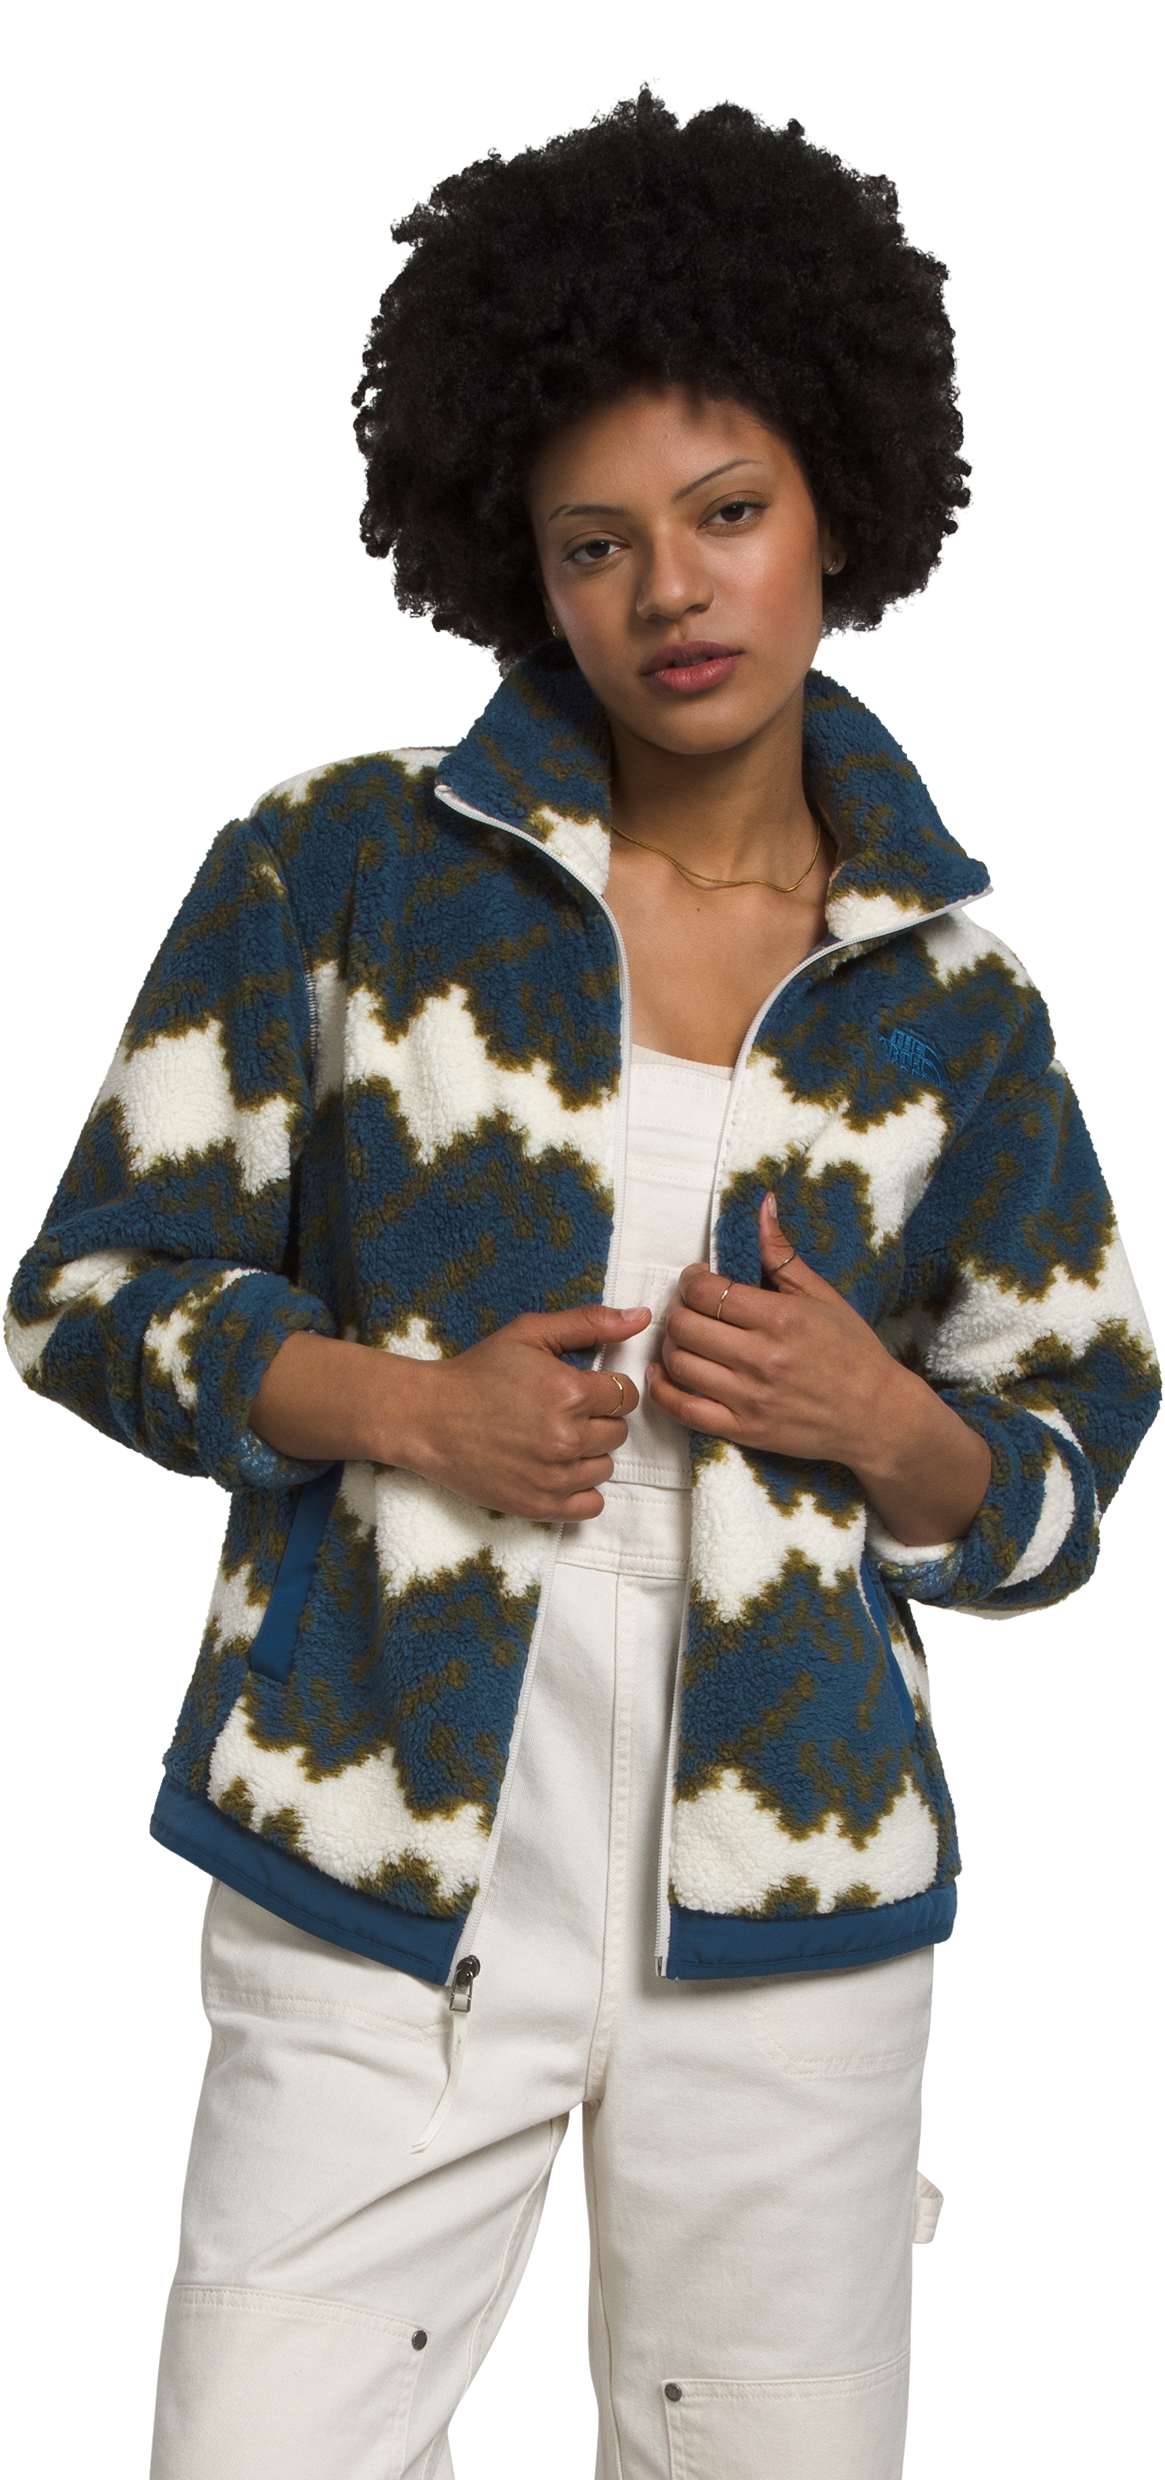 The North Face Campshire Fleece Jacket for Ladies - Shady Blue Mountain Geo Print - S